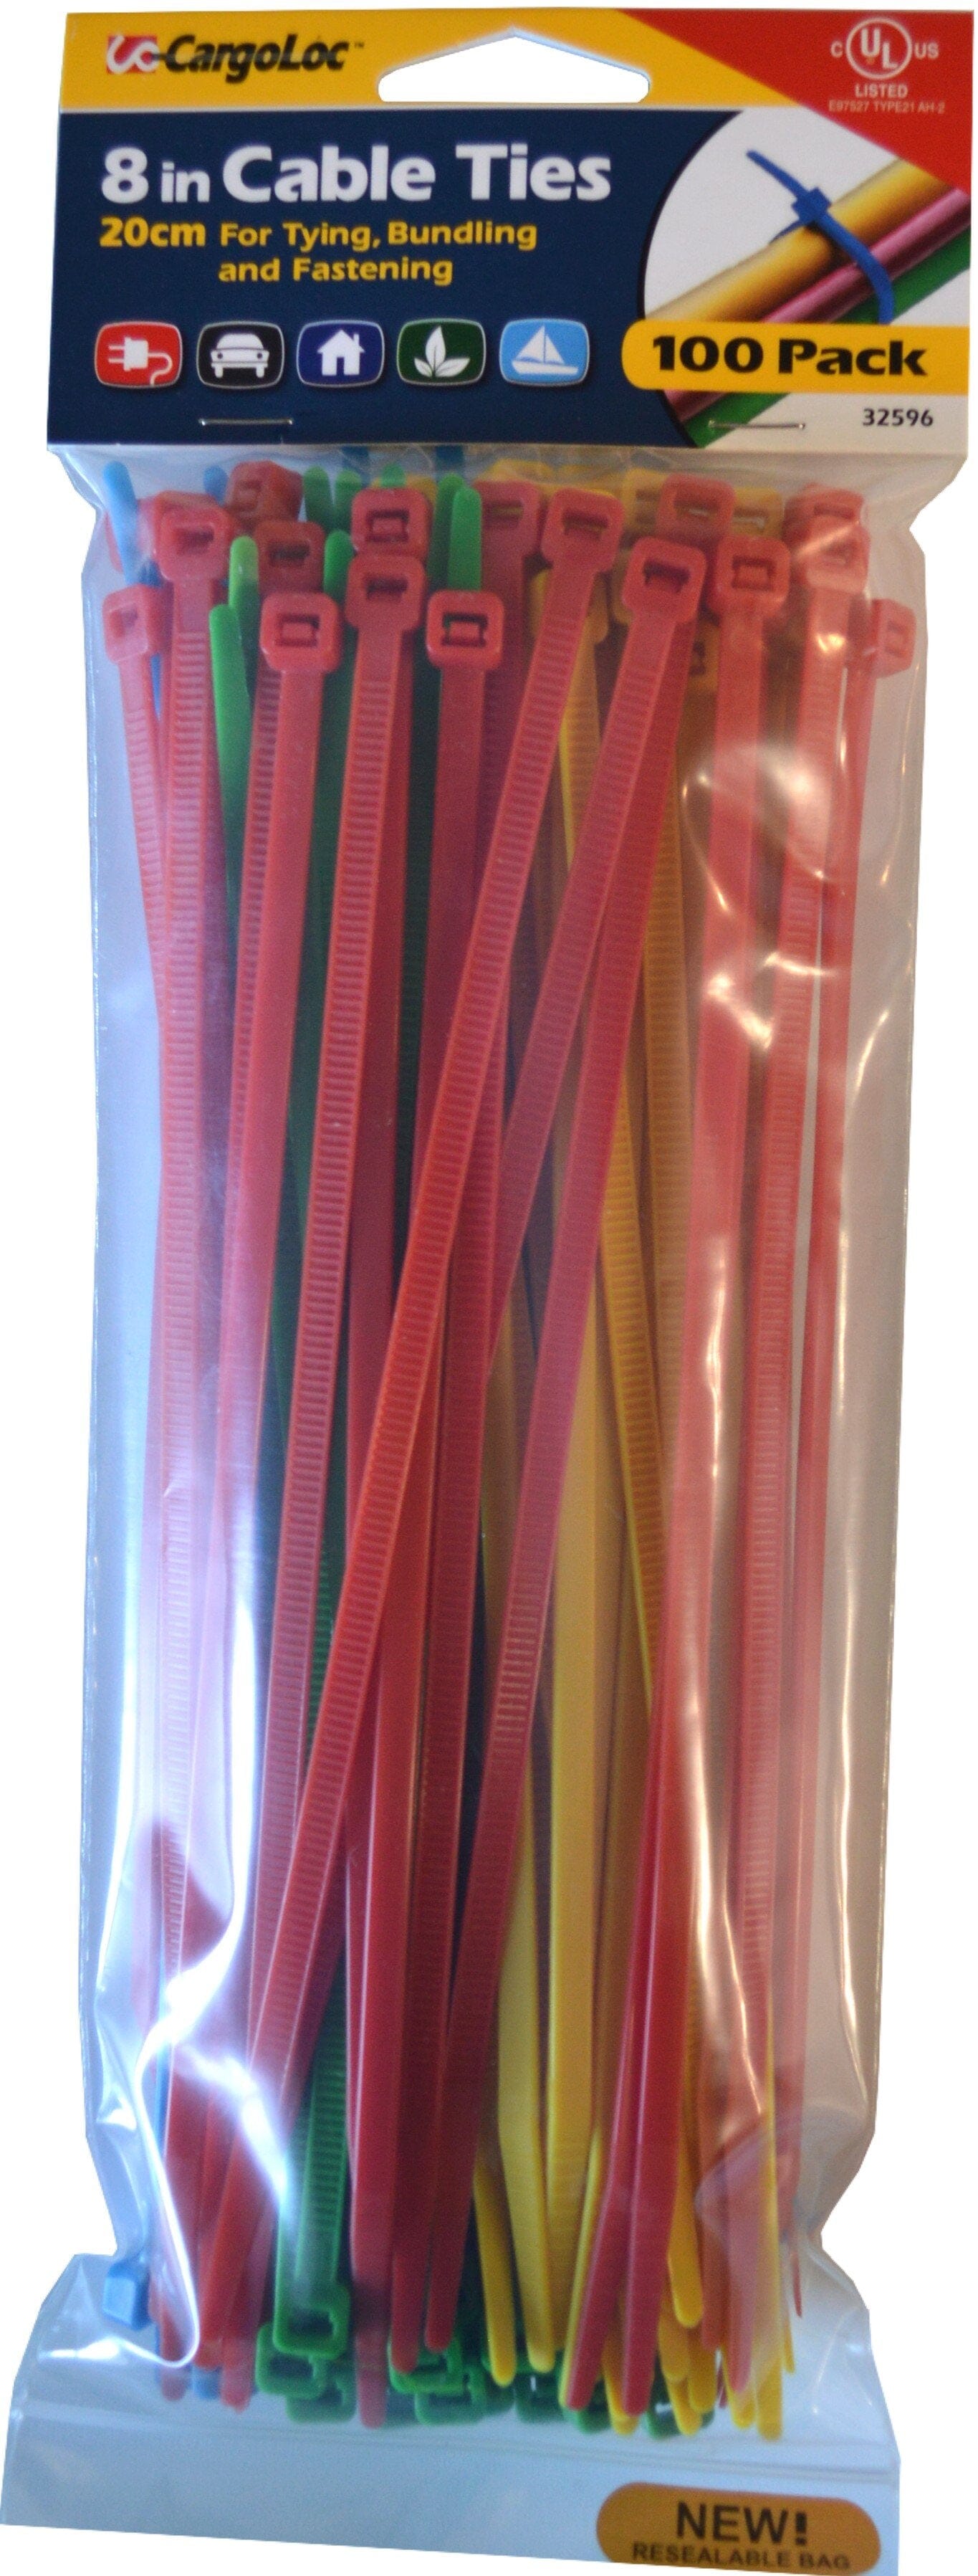 Cargoloc Cable Ties Assorted Colours 100-pce 50lb Capacity #32596 200mm